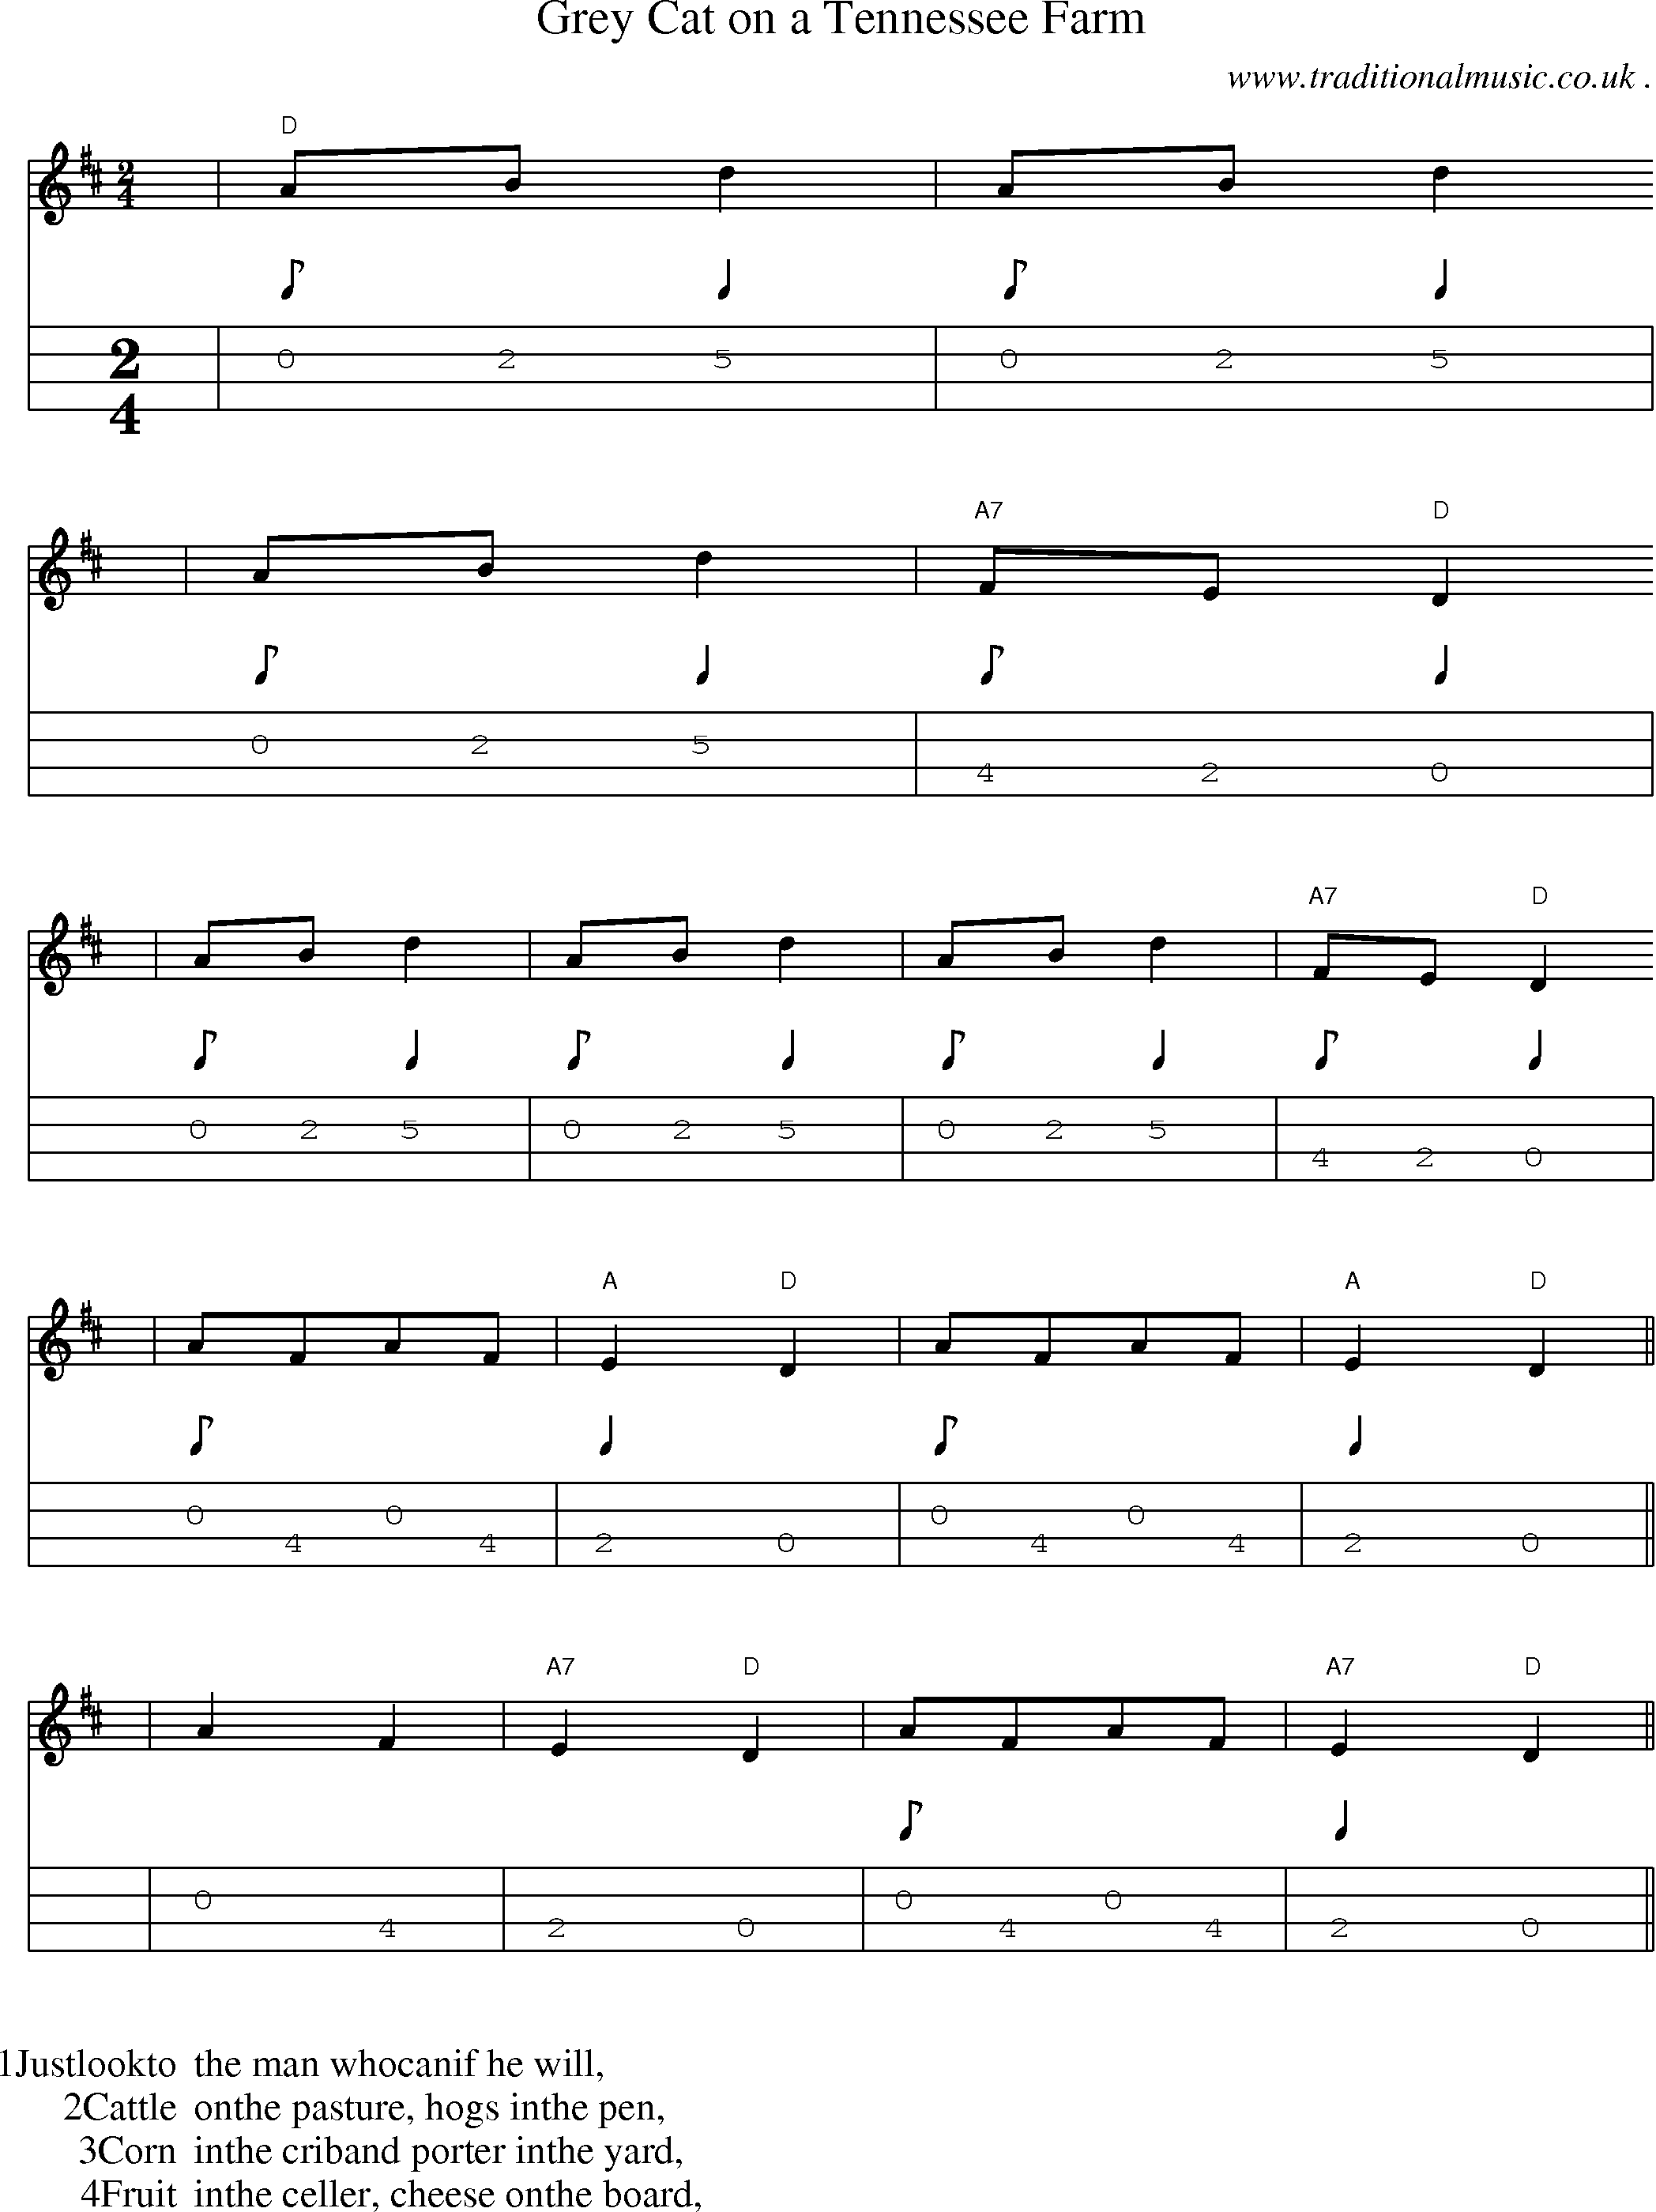 Music Score and Mandolin Tabs for Grey Cat On A Tennessee Farm